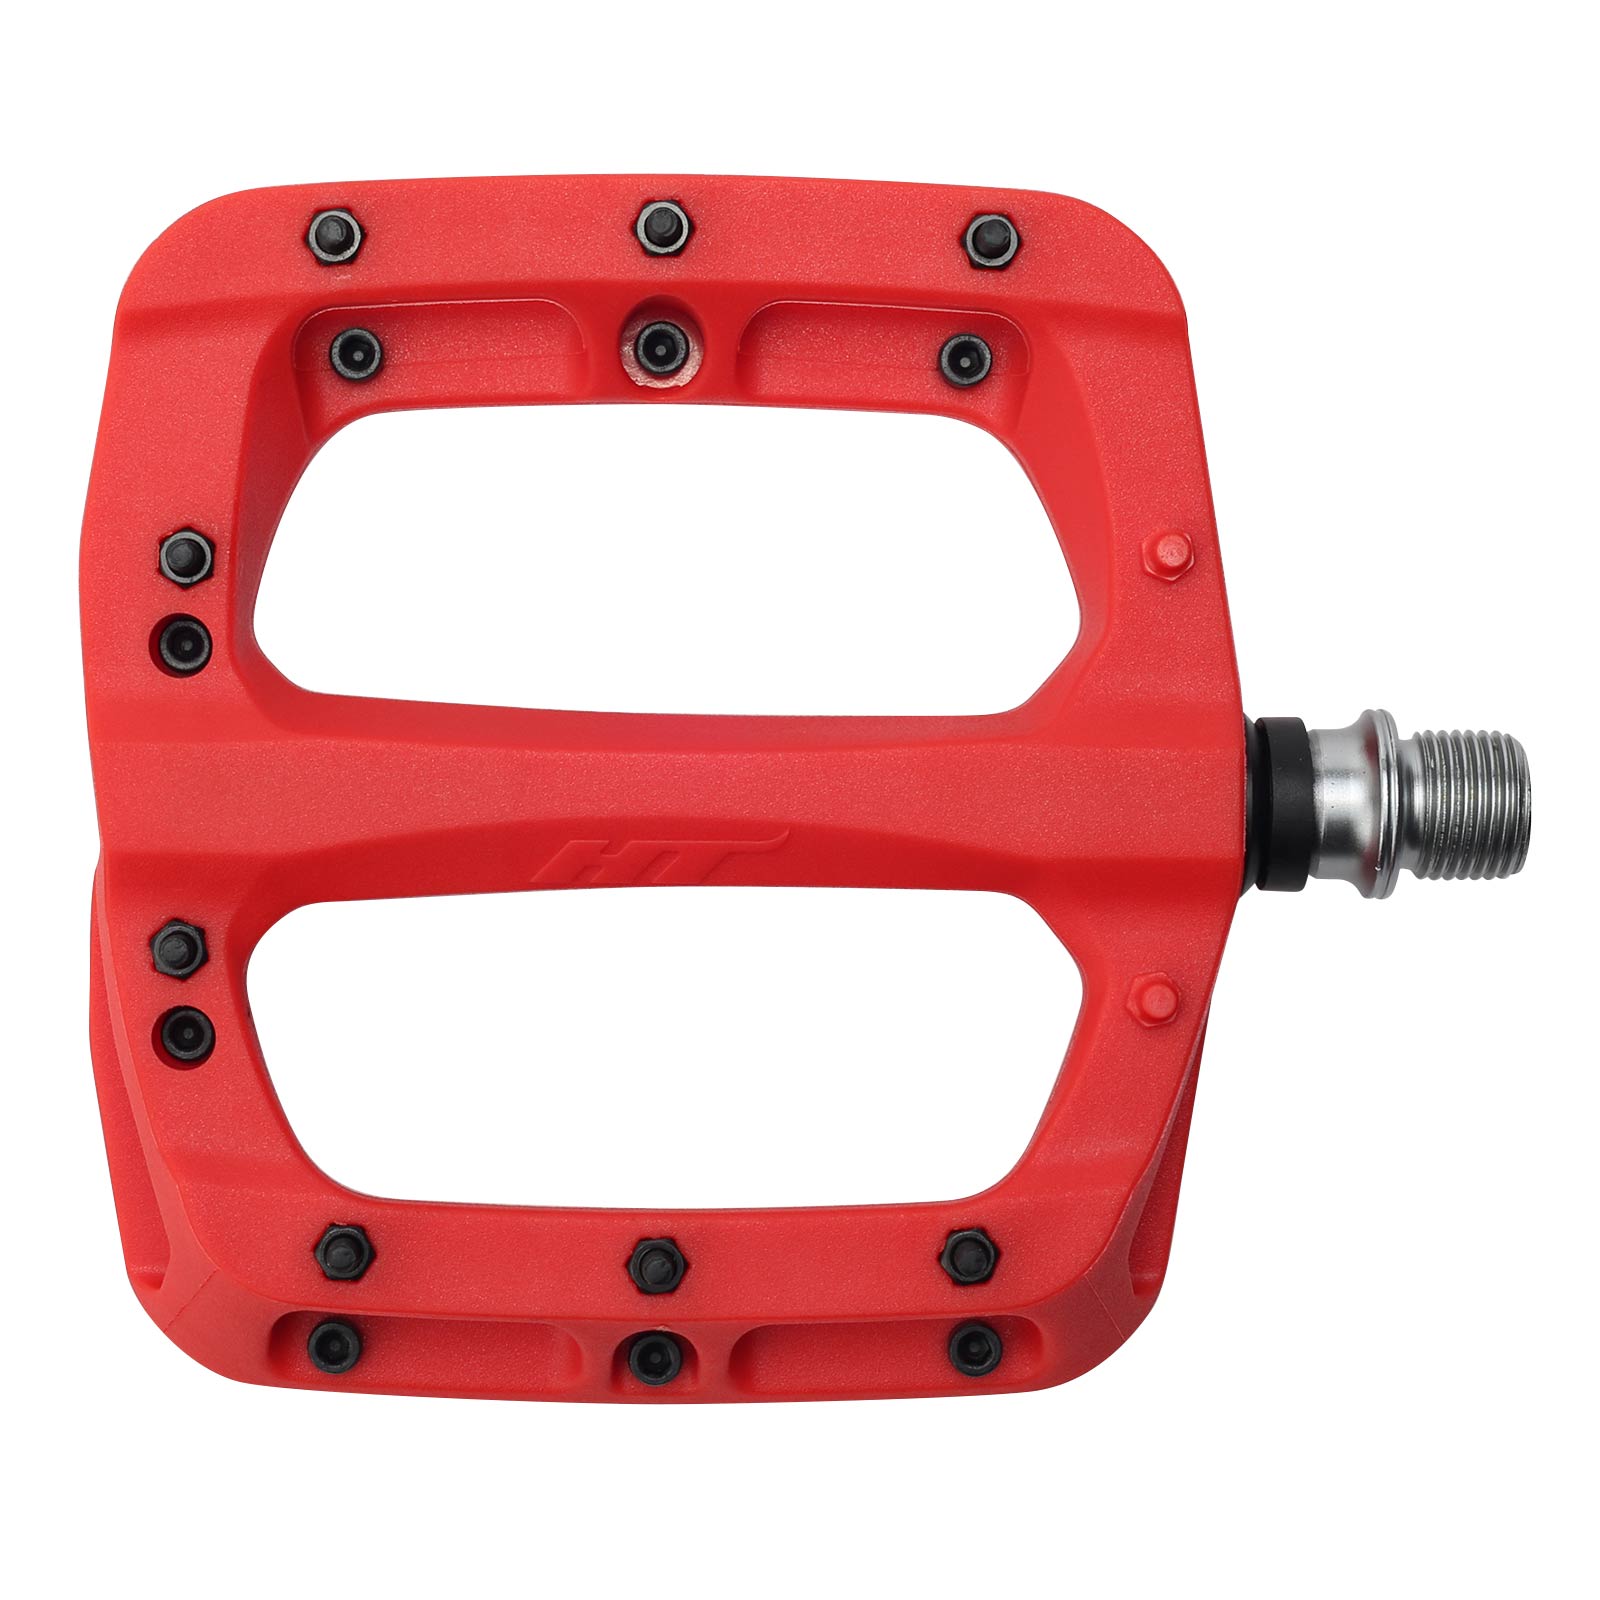 Ht PA03A Pedals Nylon / CNC CRMO - Red